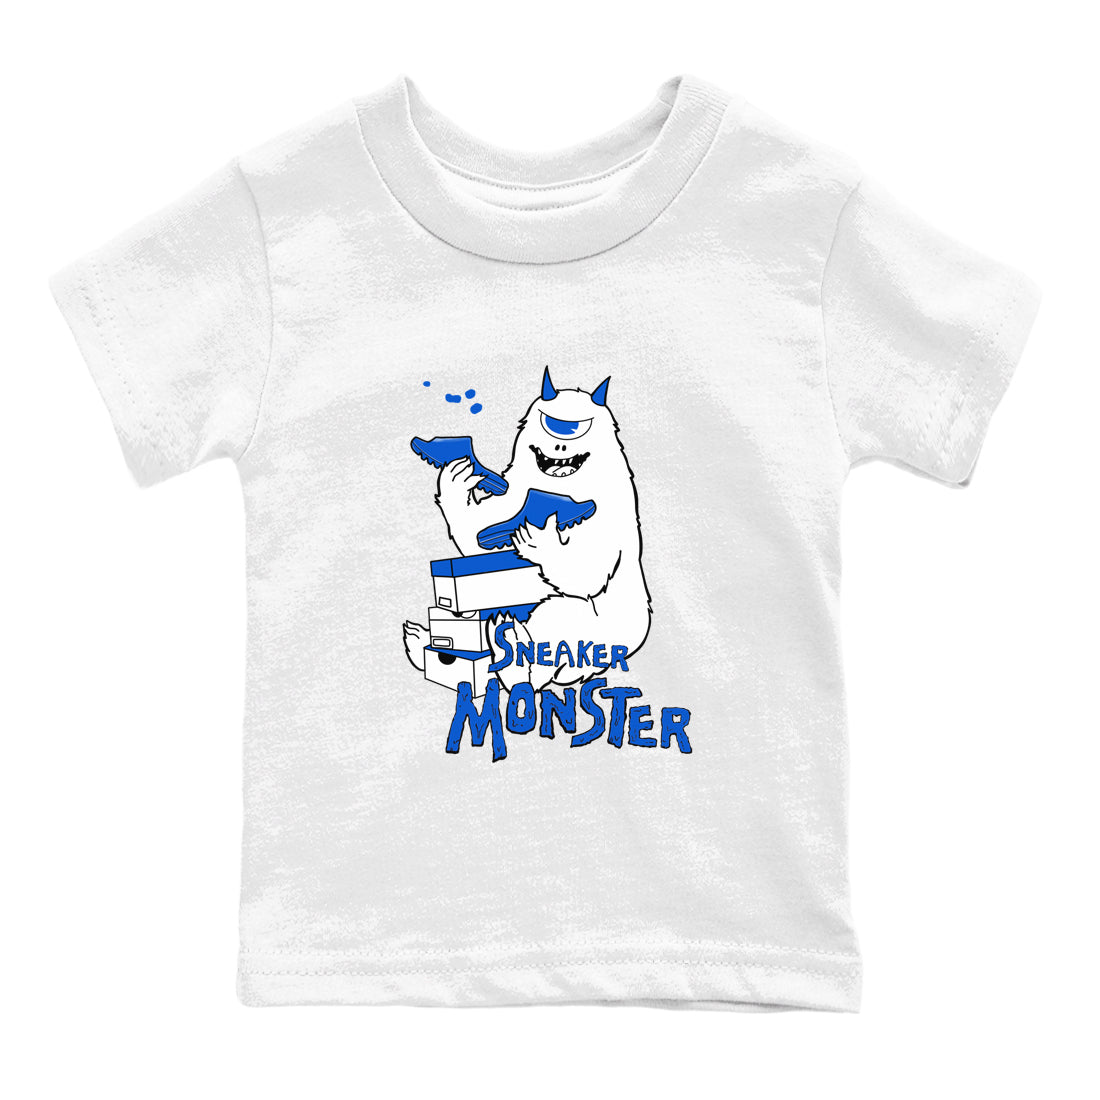 Yeezy Slide Azure shirts to match jordans Sneaker Monster sneaker match tees Yeezy Slide Azure SNRT Sneaker Tees streetwear brand Baby and Youth White 2 cotton tee